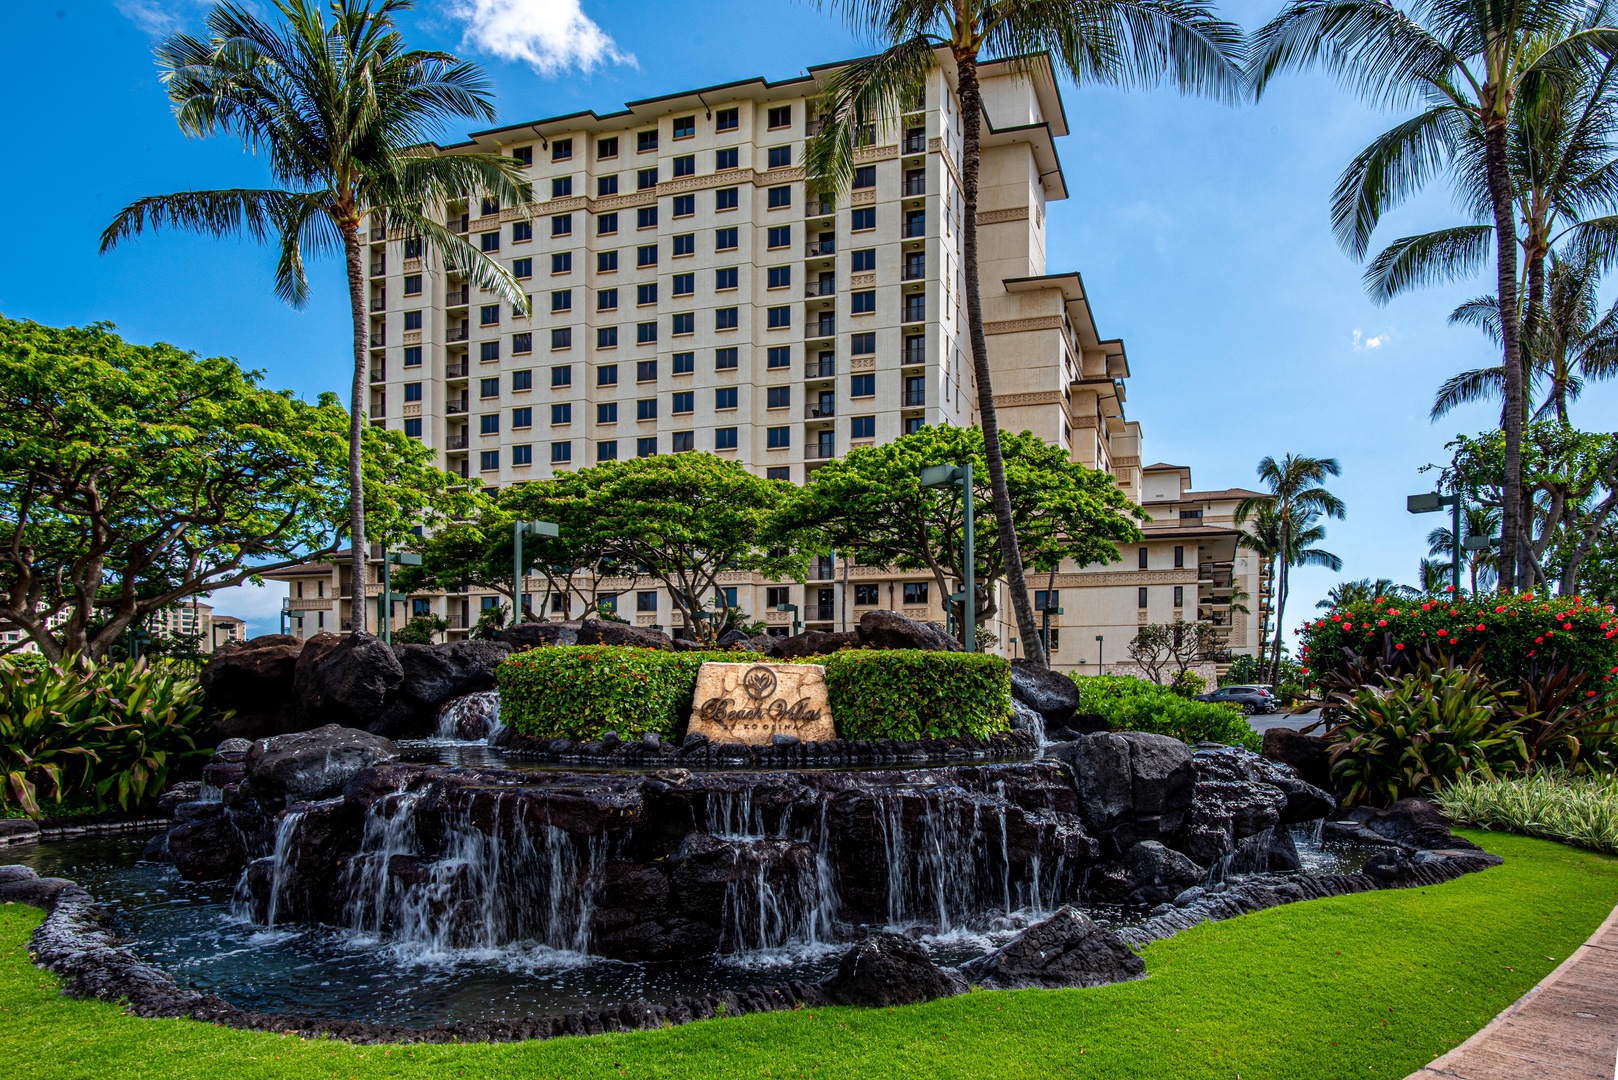 Kapolei Vacation Rentals, Ko Olina Beach Villas B301 - The fountain outside at entrance of resort. We welcome you to your vacation!